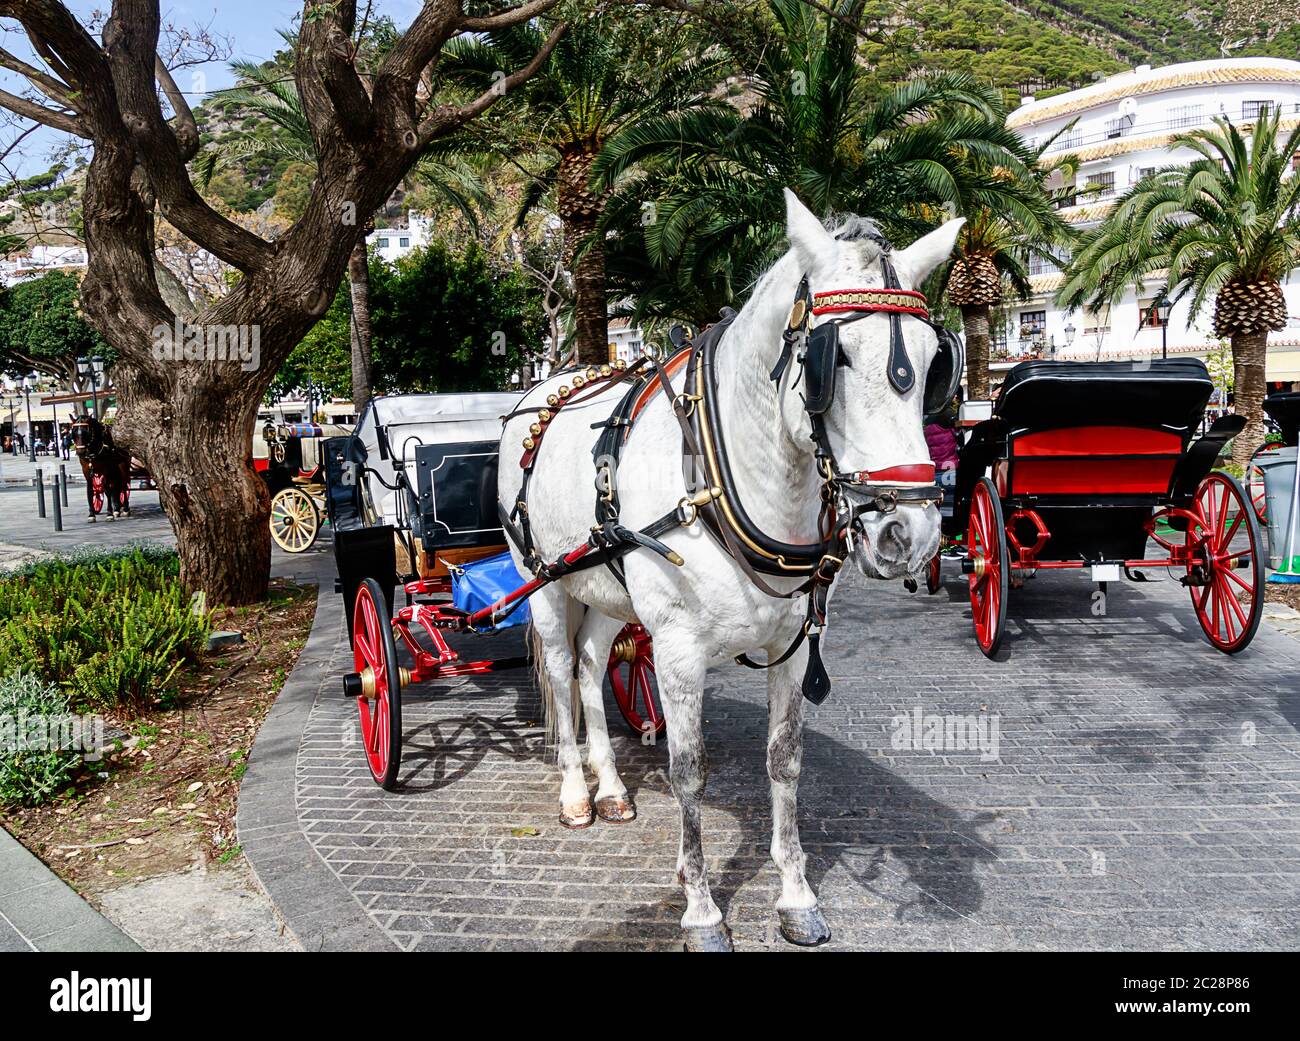 Horse-drawn carriages in the main square of Mijas pueblo, one of the most visited of Andaluciaâ€™s white villages, Costa del Sol. Stock Photo